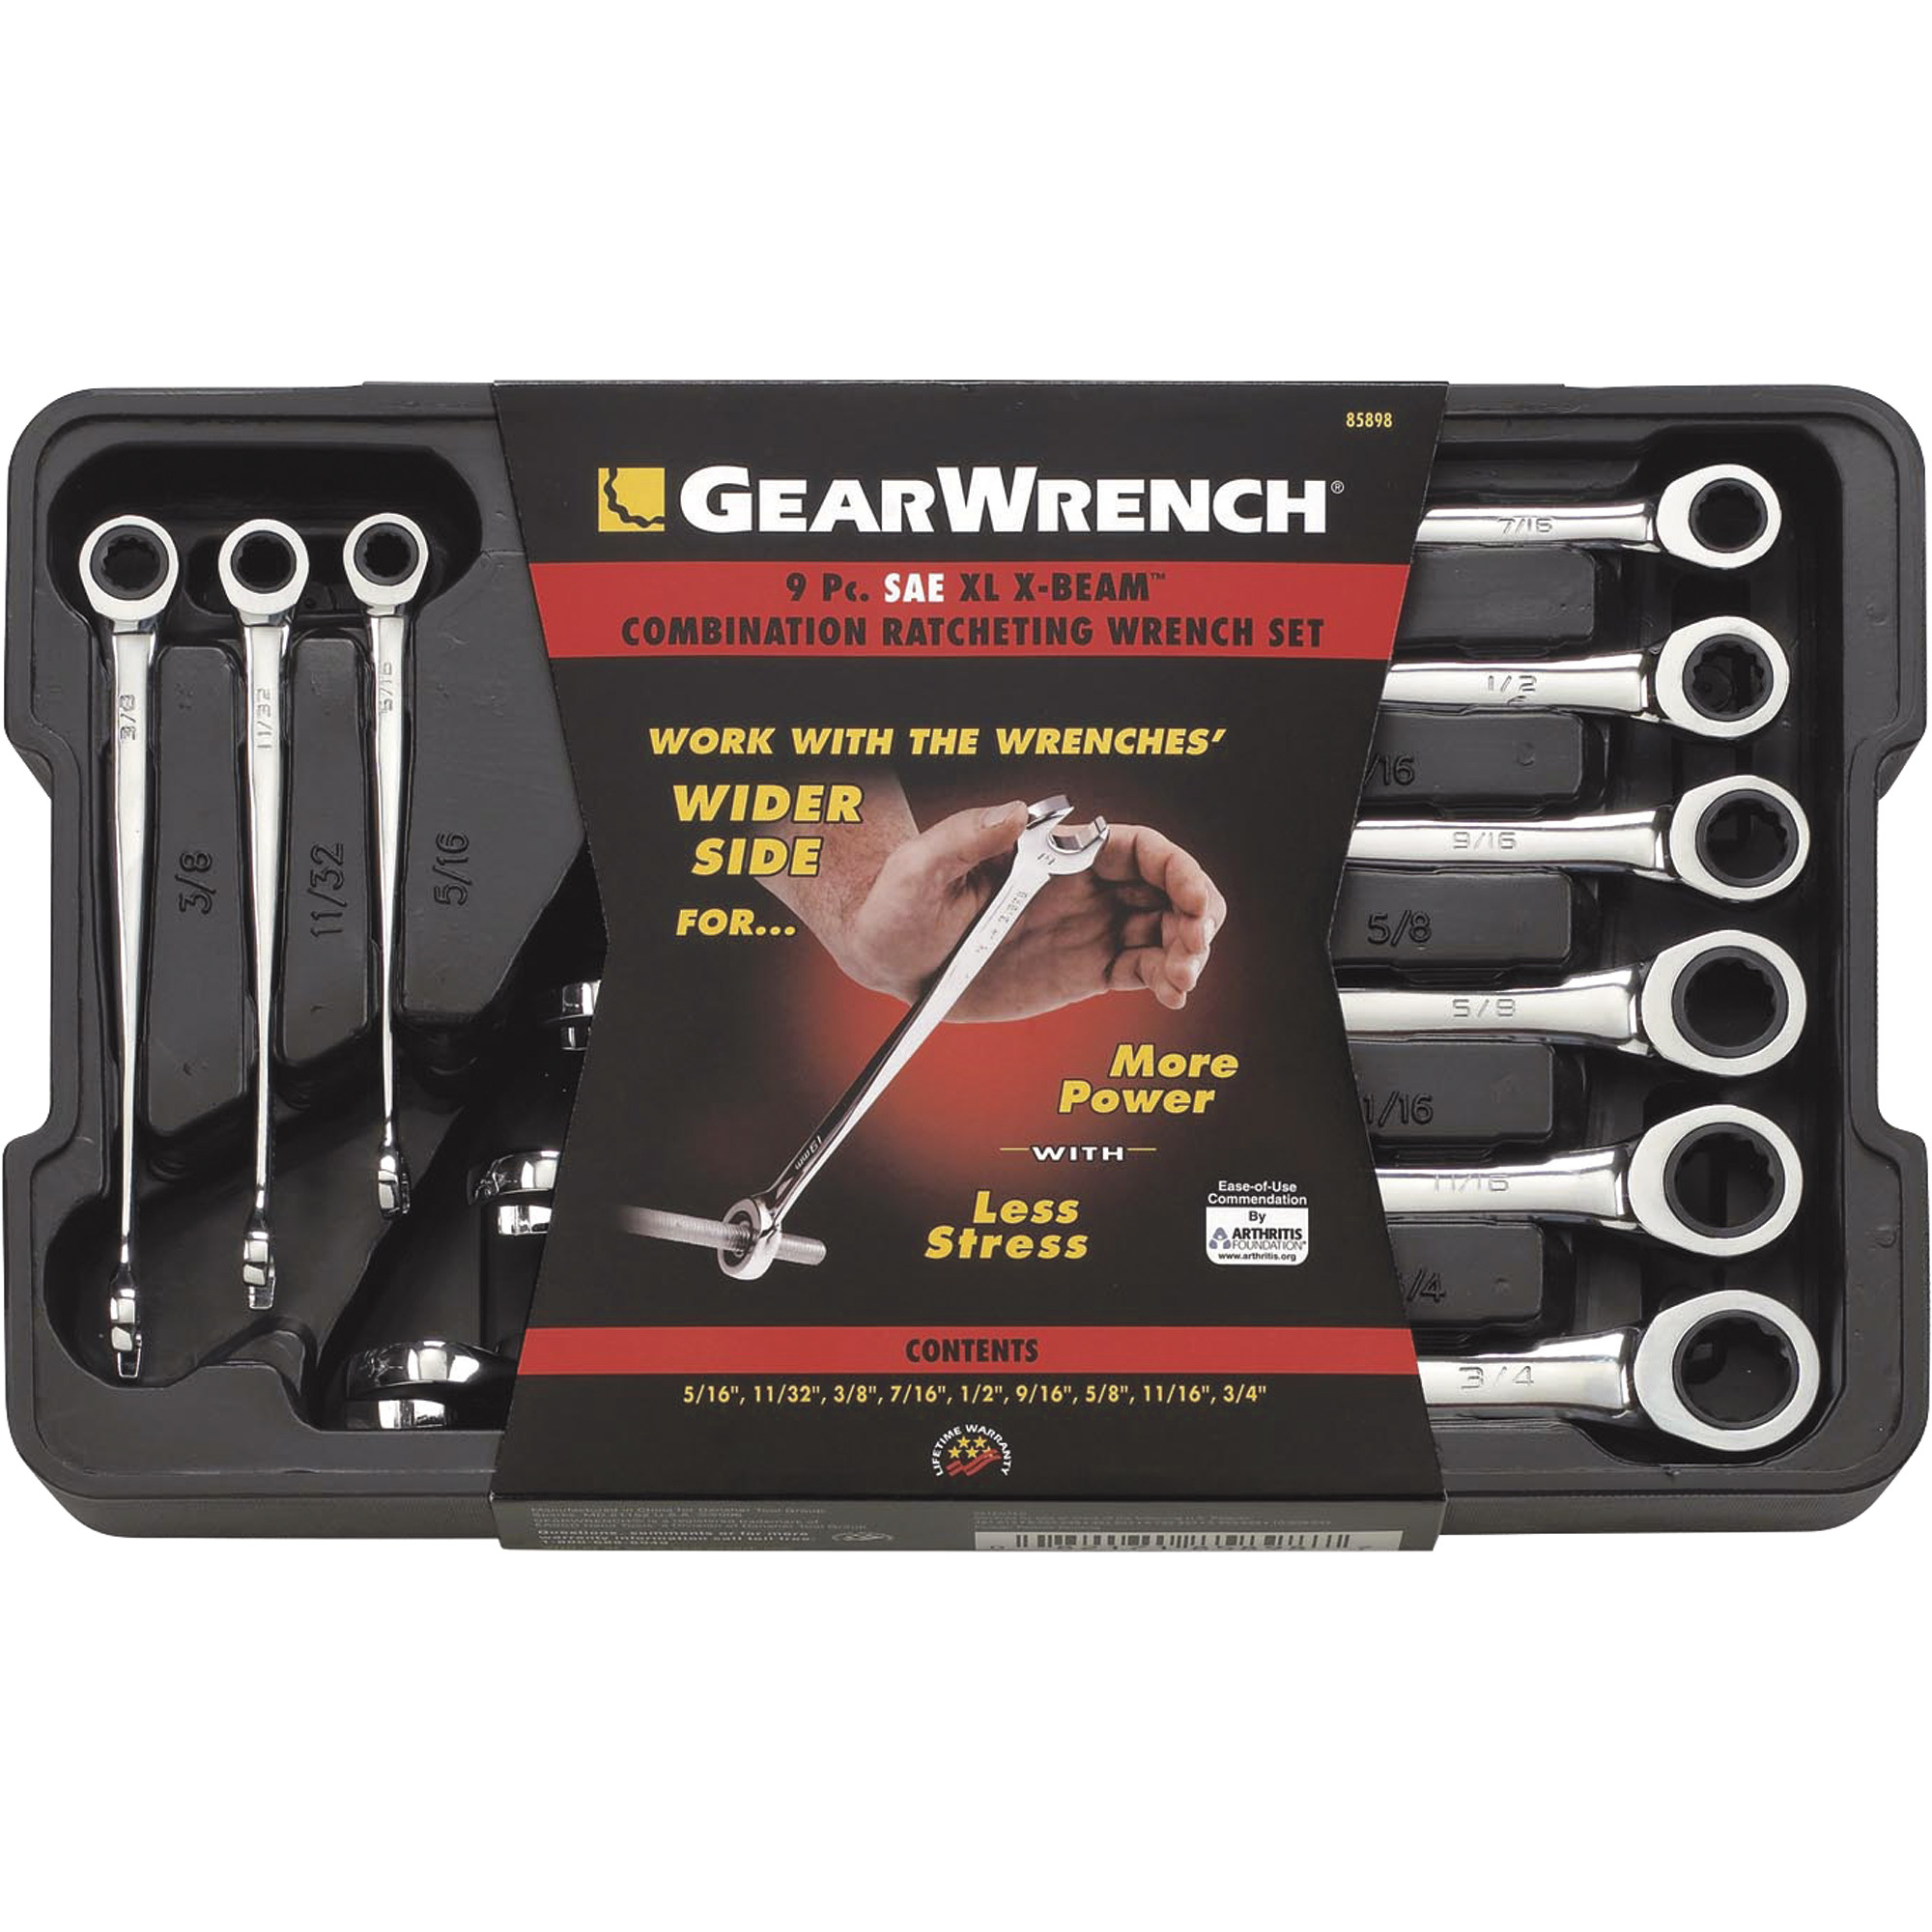 GearWrench Extra-Long X-Beam Ratcheting Combination Wrenches â 9-Piece SAE Set, 5/16Inchâ3/4Inch, Model 85898